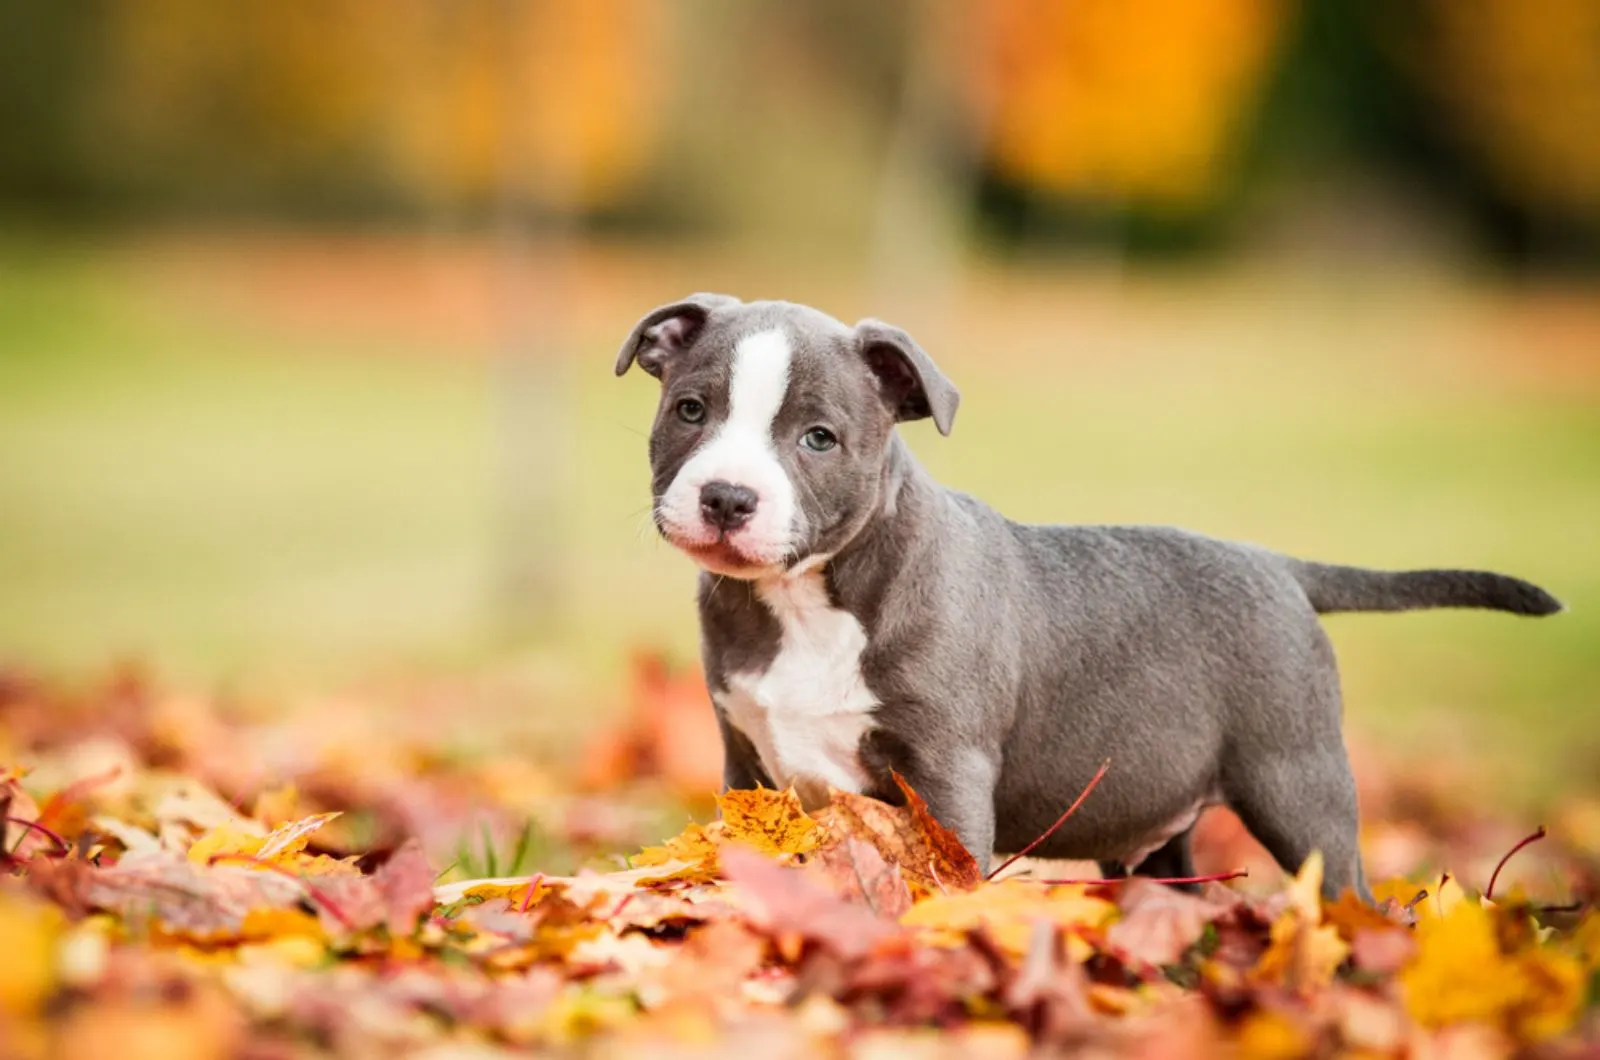 staffordshire bull terrier puppy standing in fallen leaves